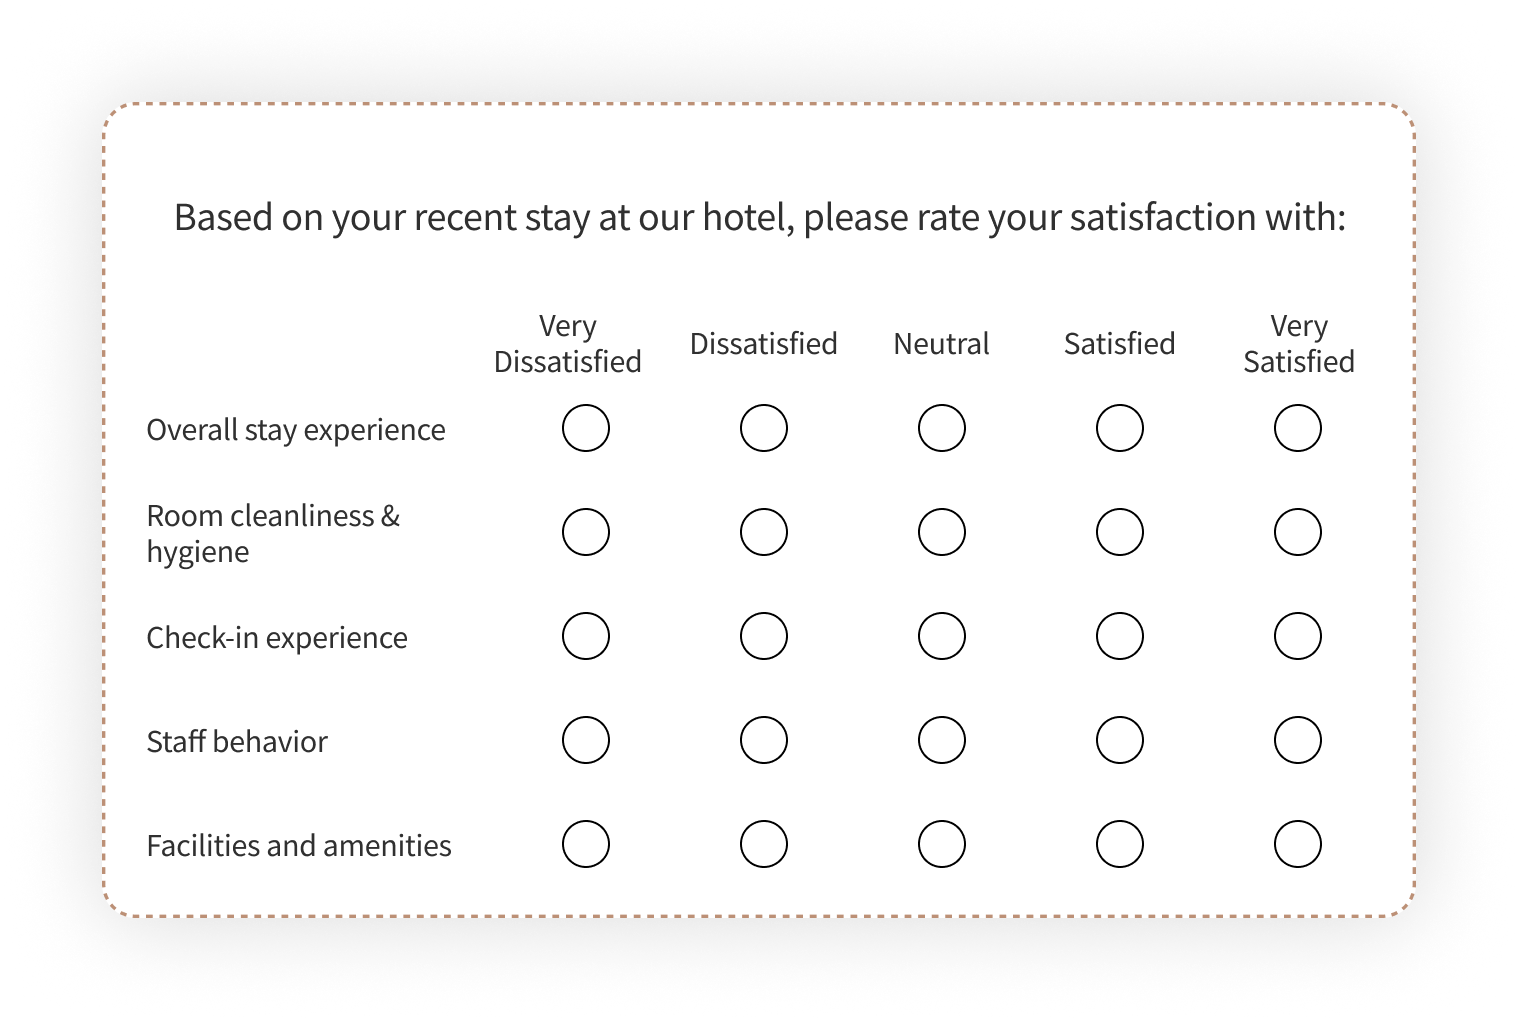 Hotel customer satisfaction survey questions on Stay Experience